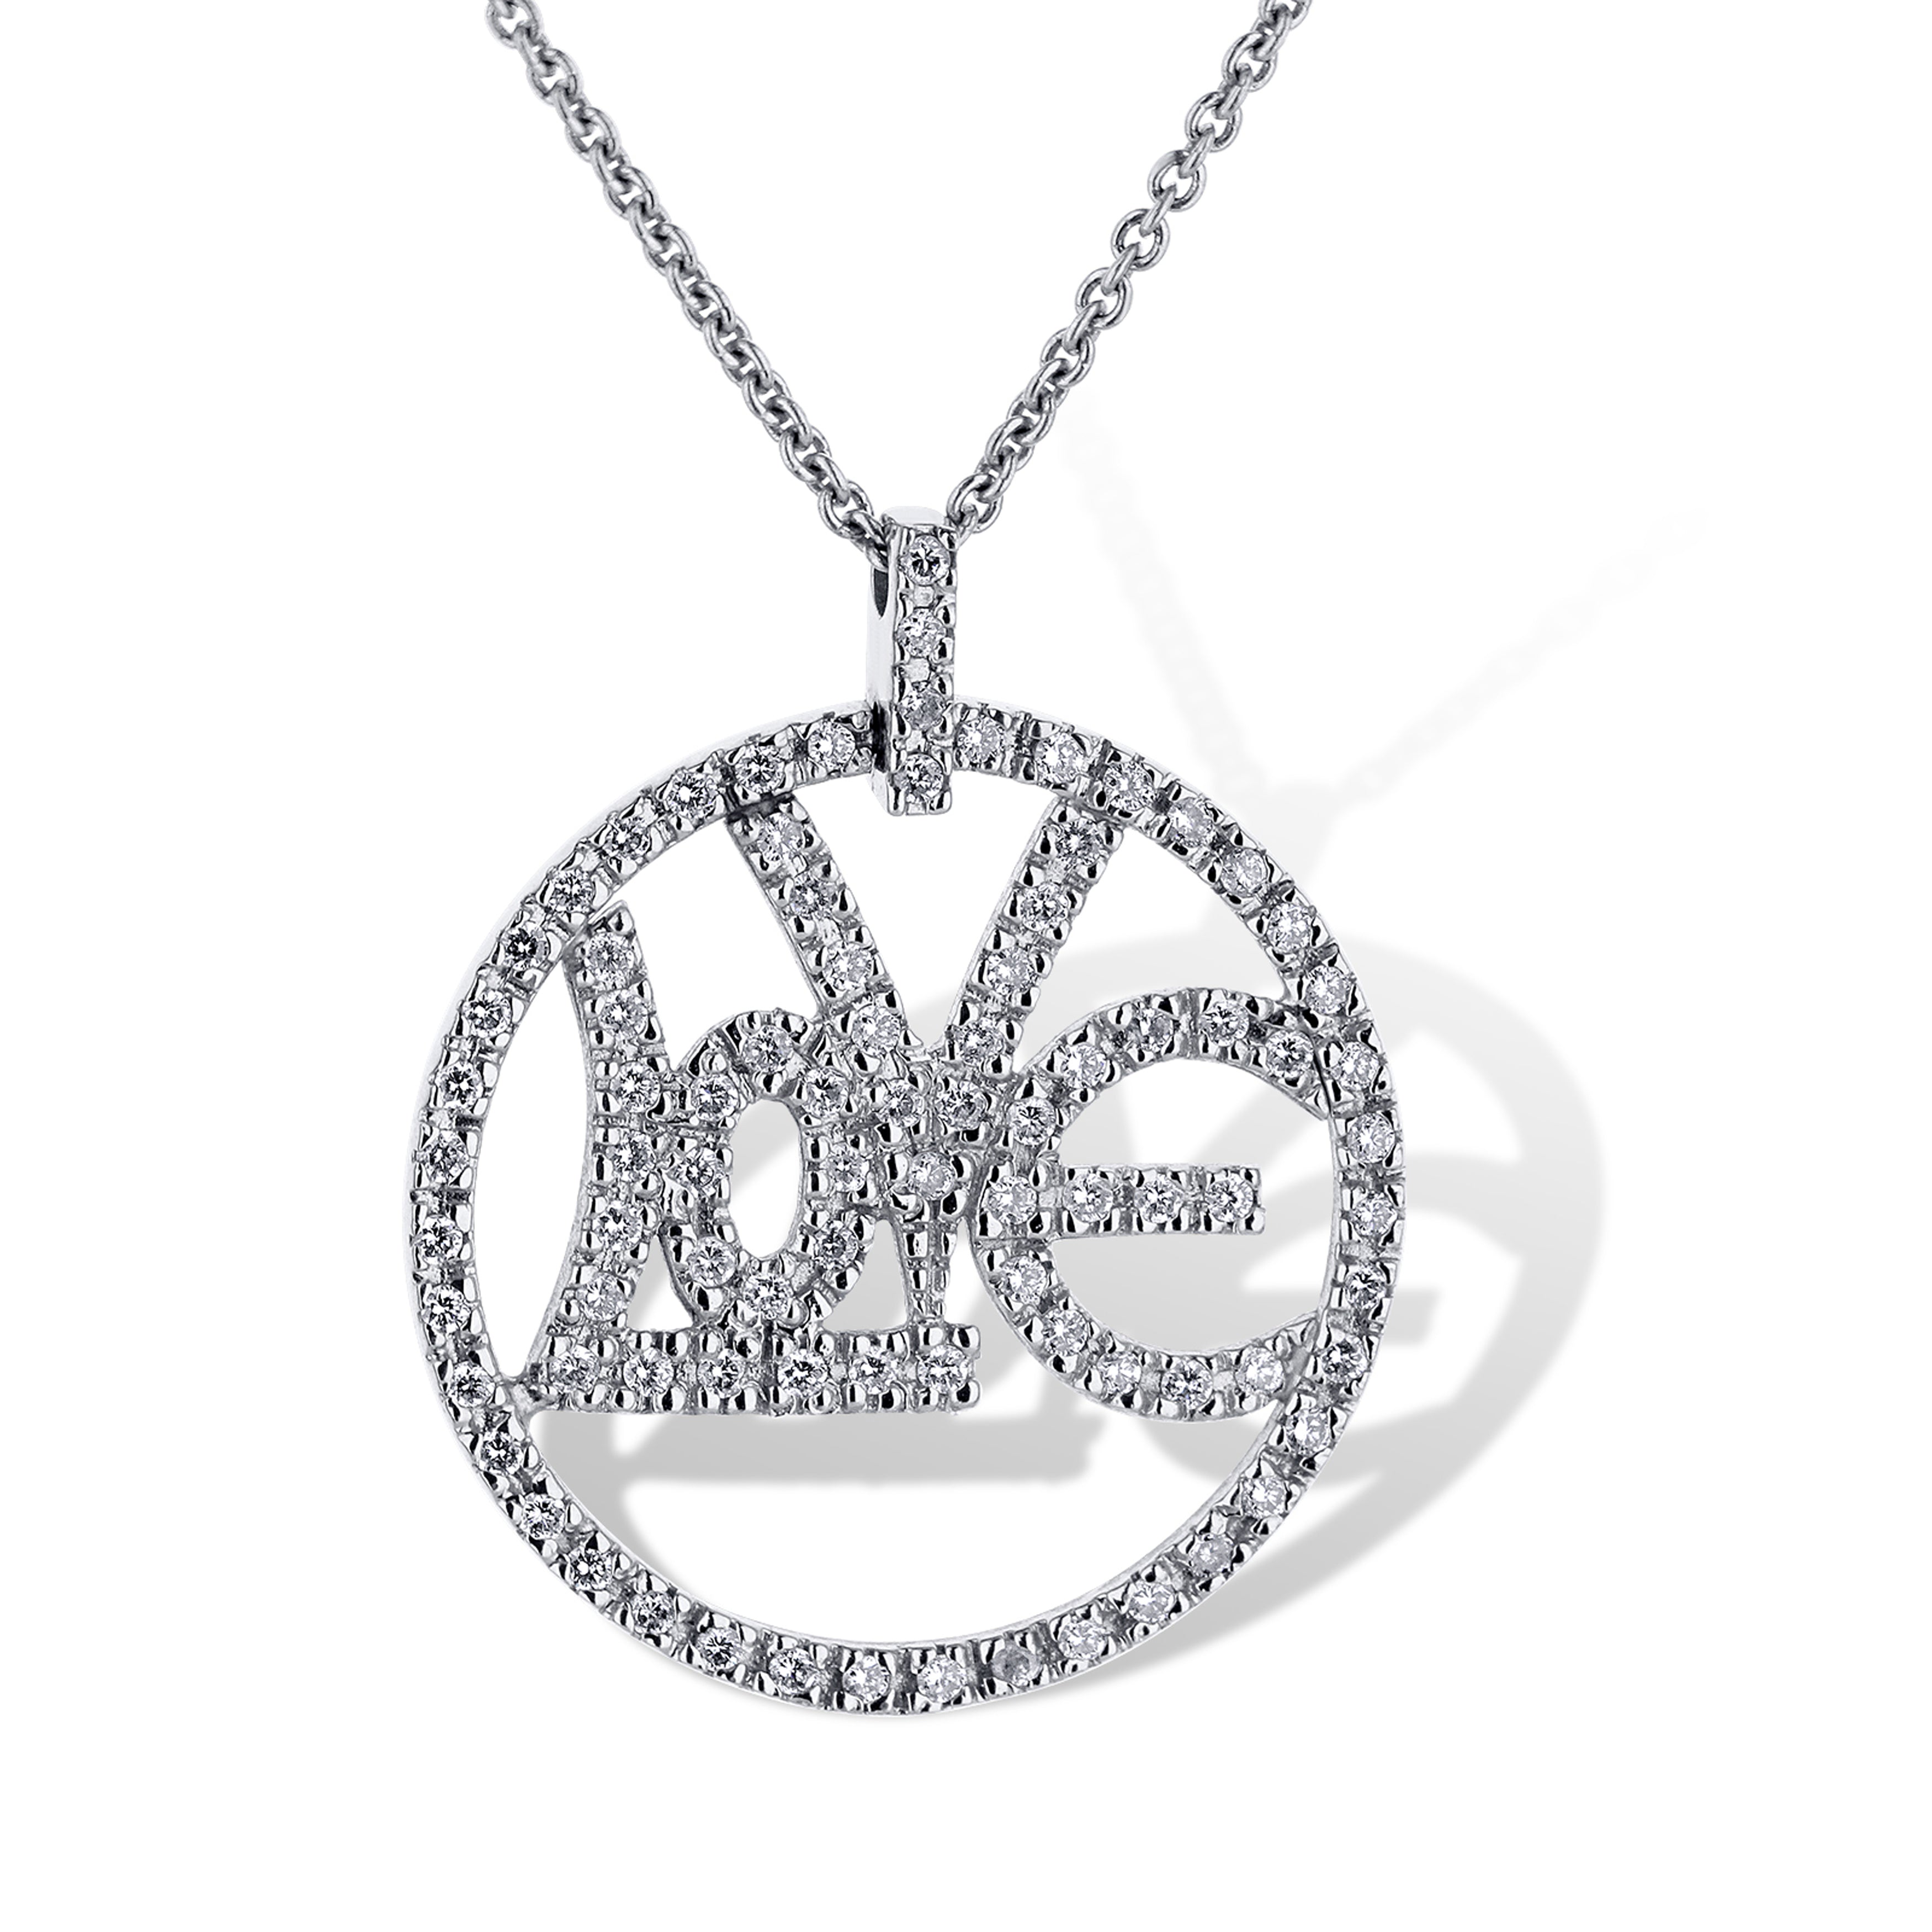 18K White Gold Diamond "Love" Pendant Necklace With Chain